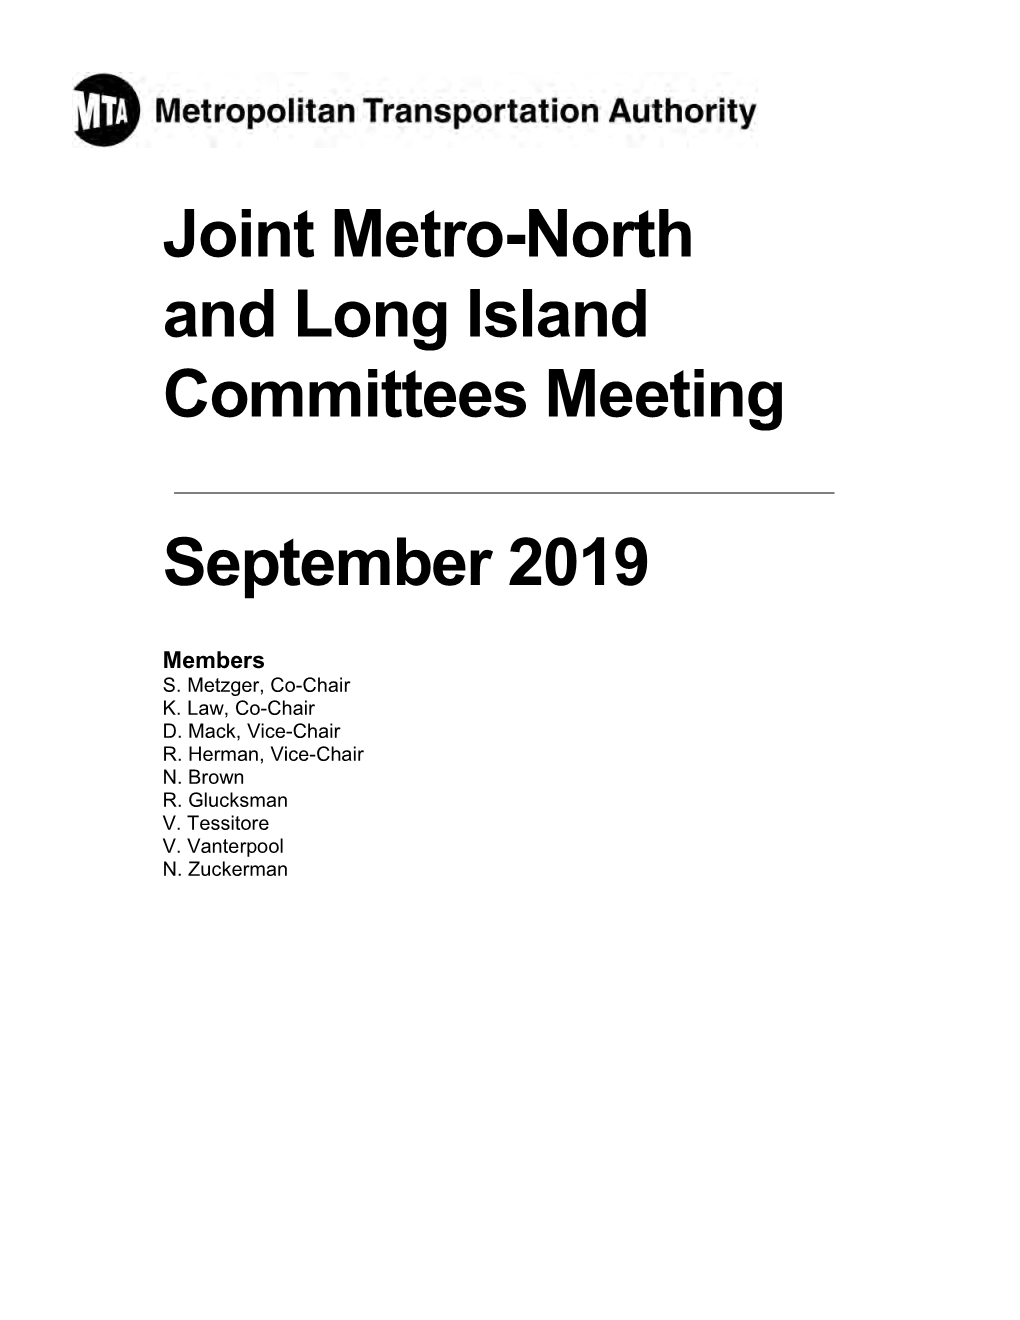 Joint Metro-North and Long Island Committees Meeting September 2019